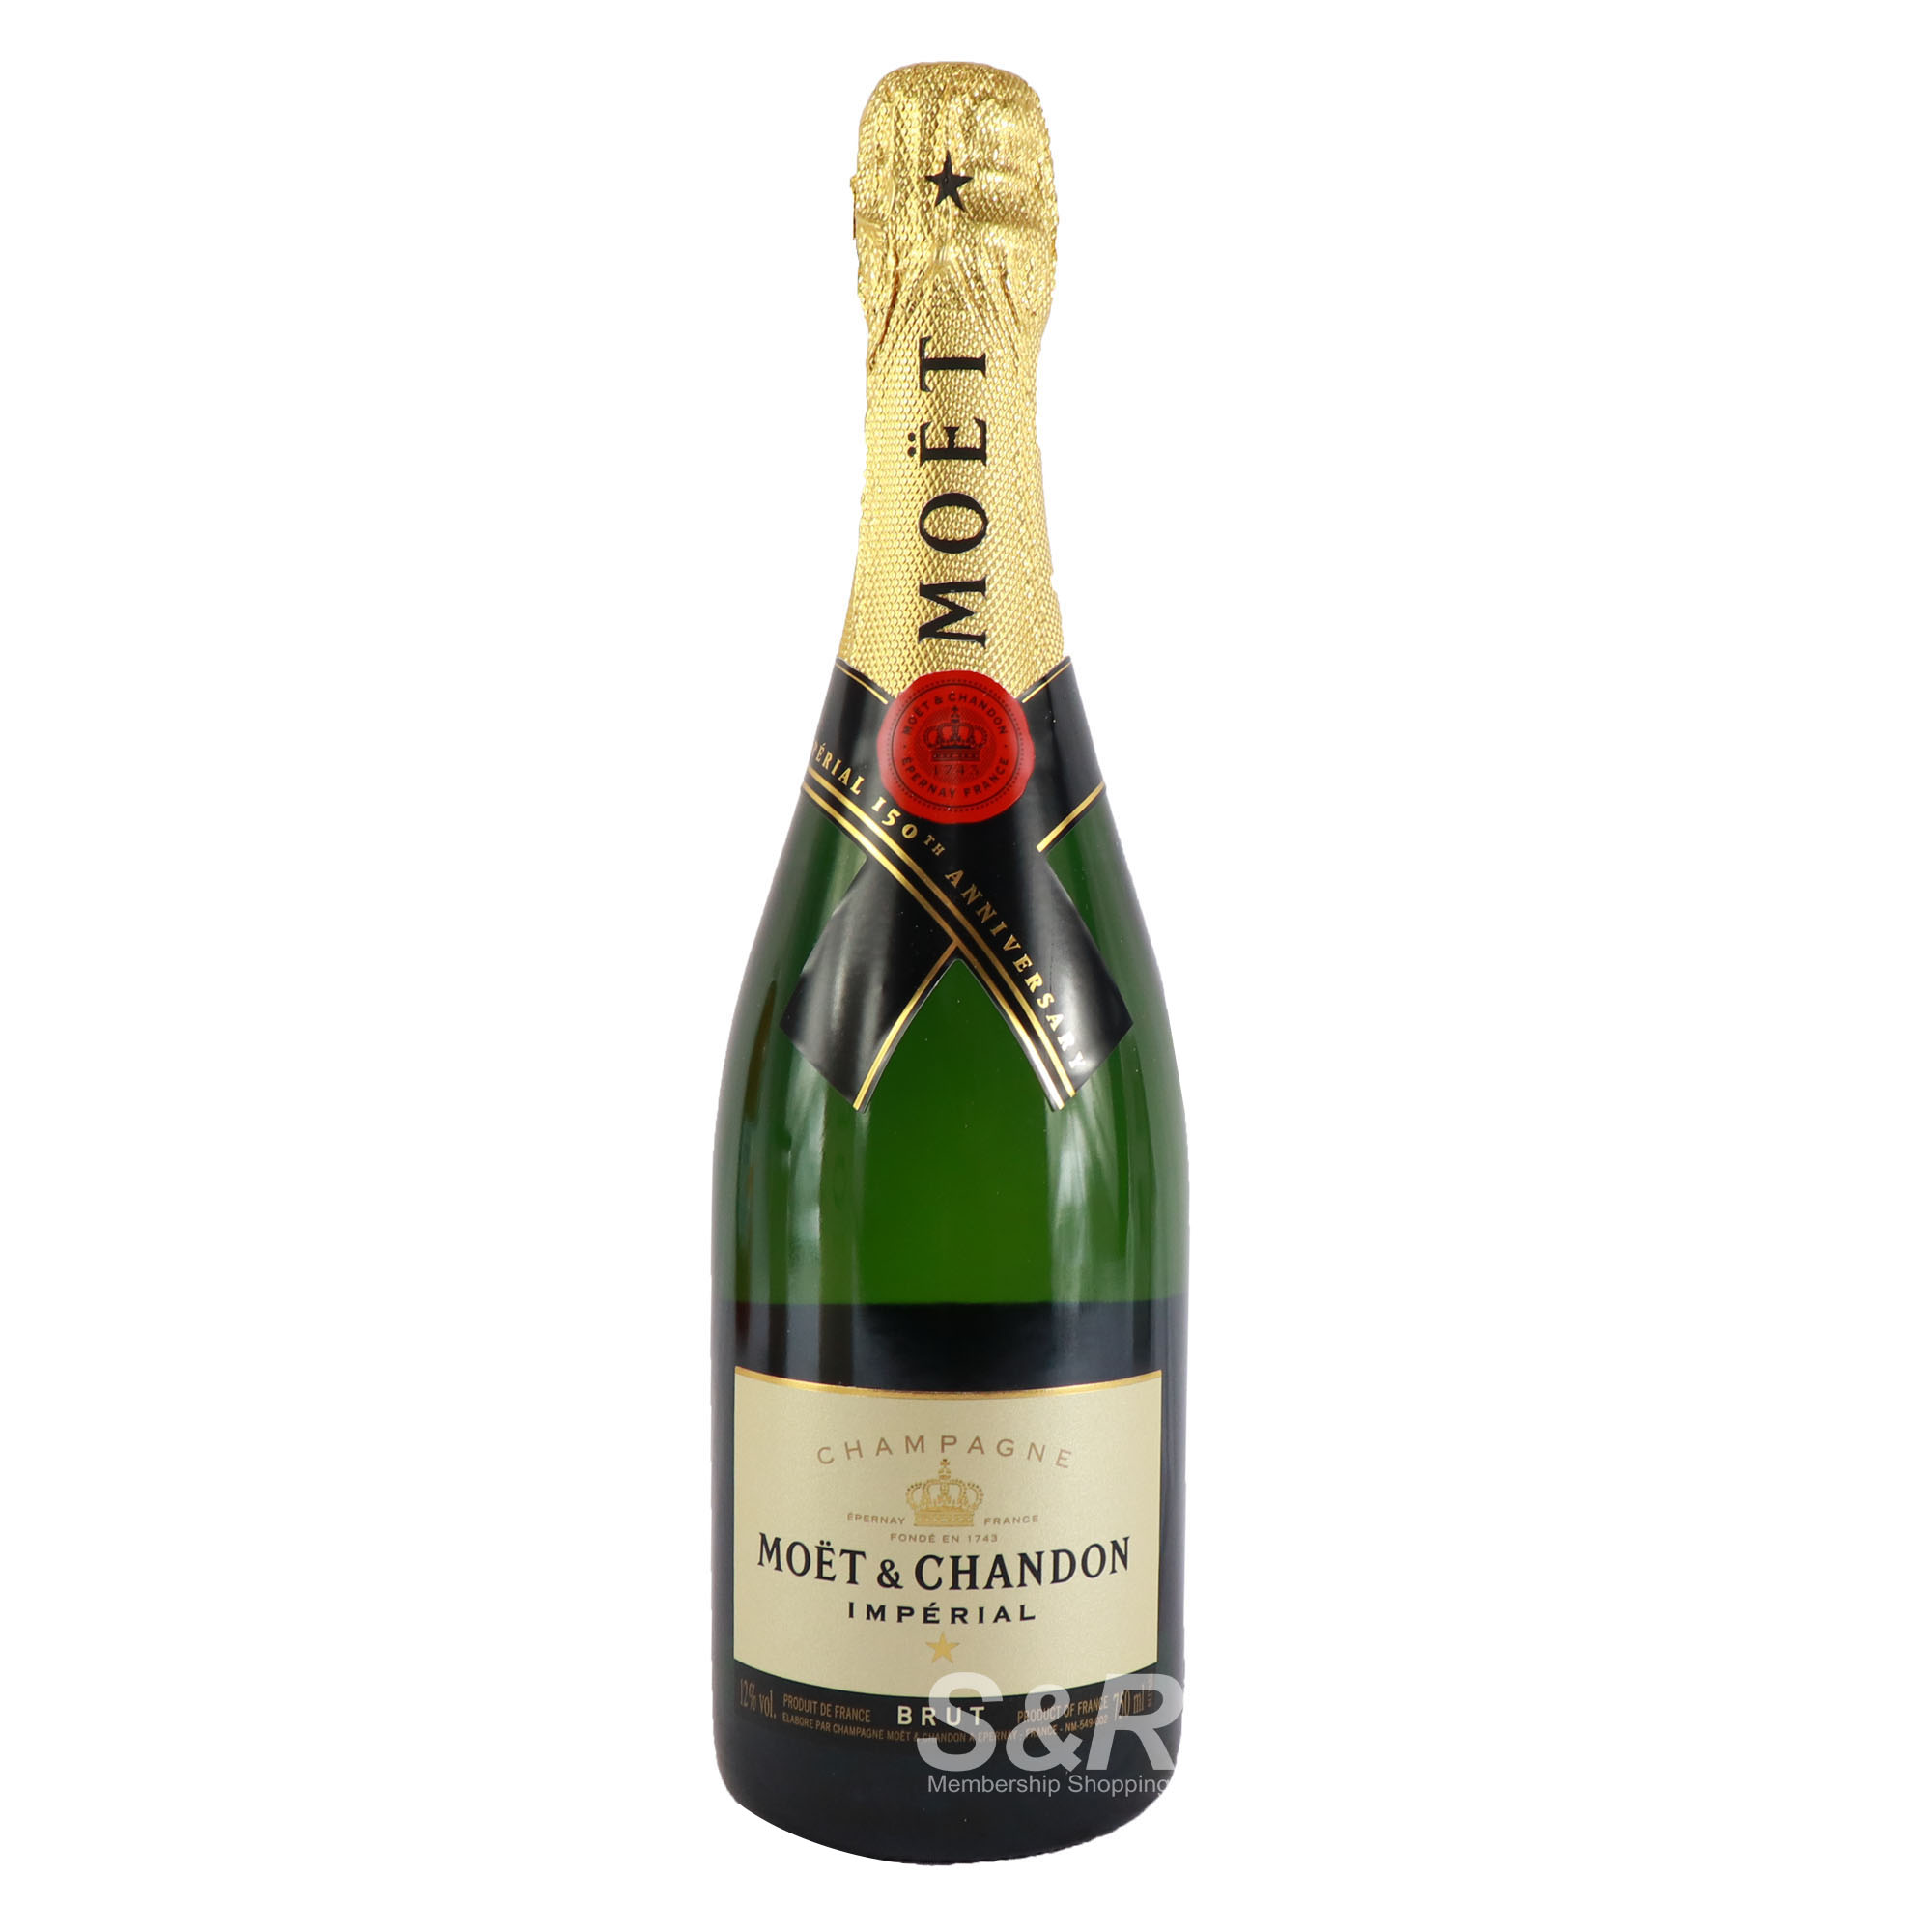 Moet & Chandon Imperial Champagne 750 mL